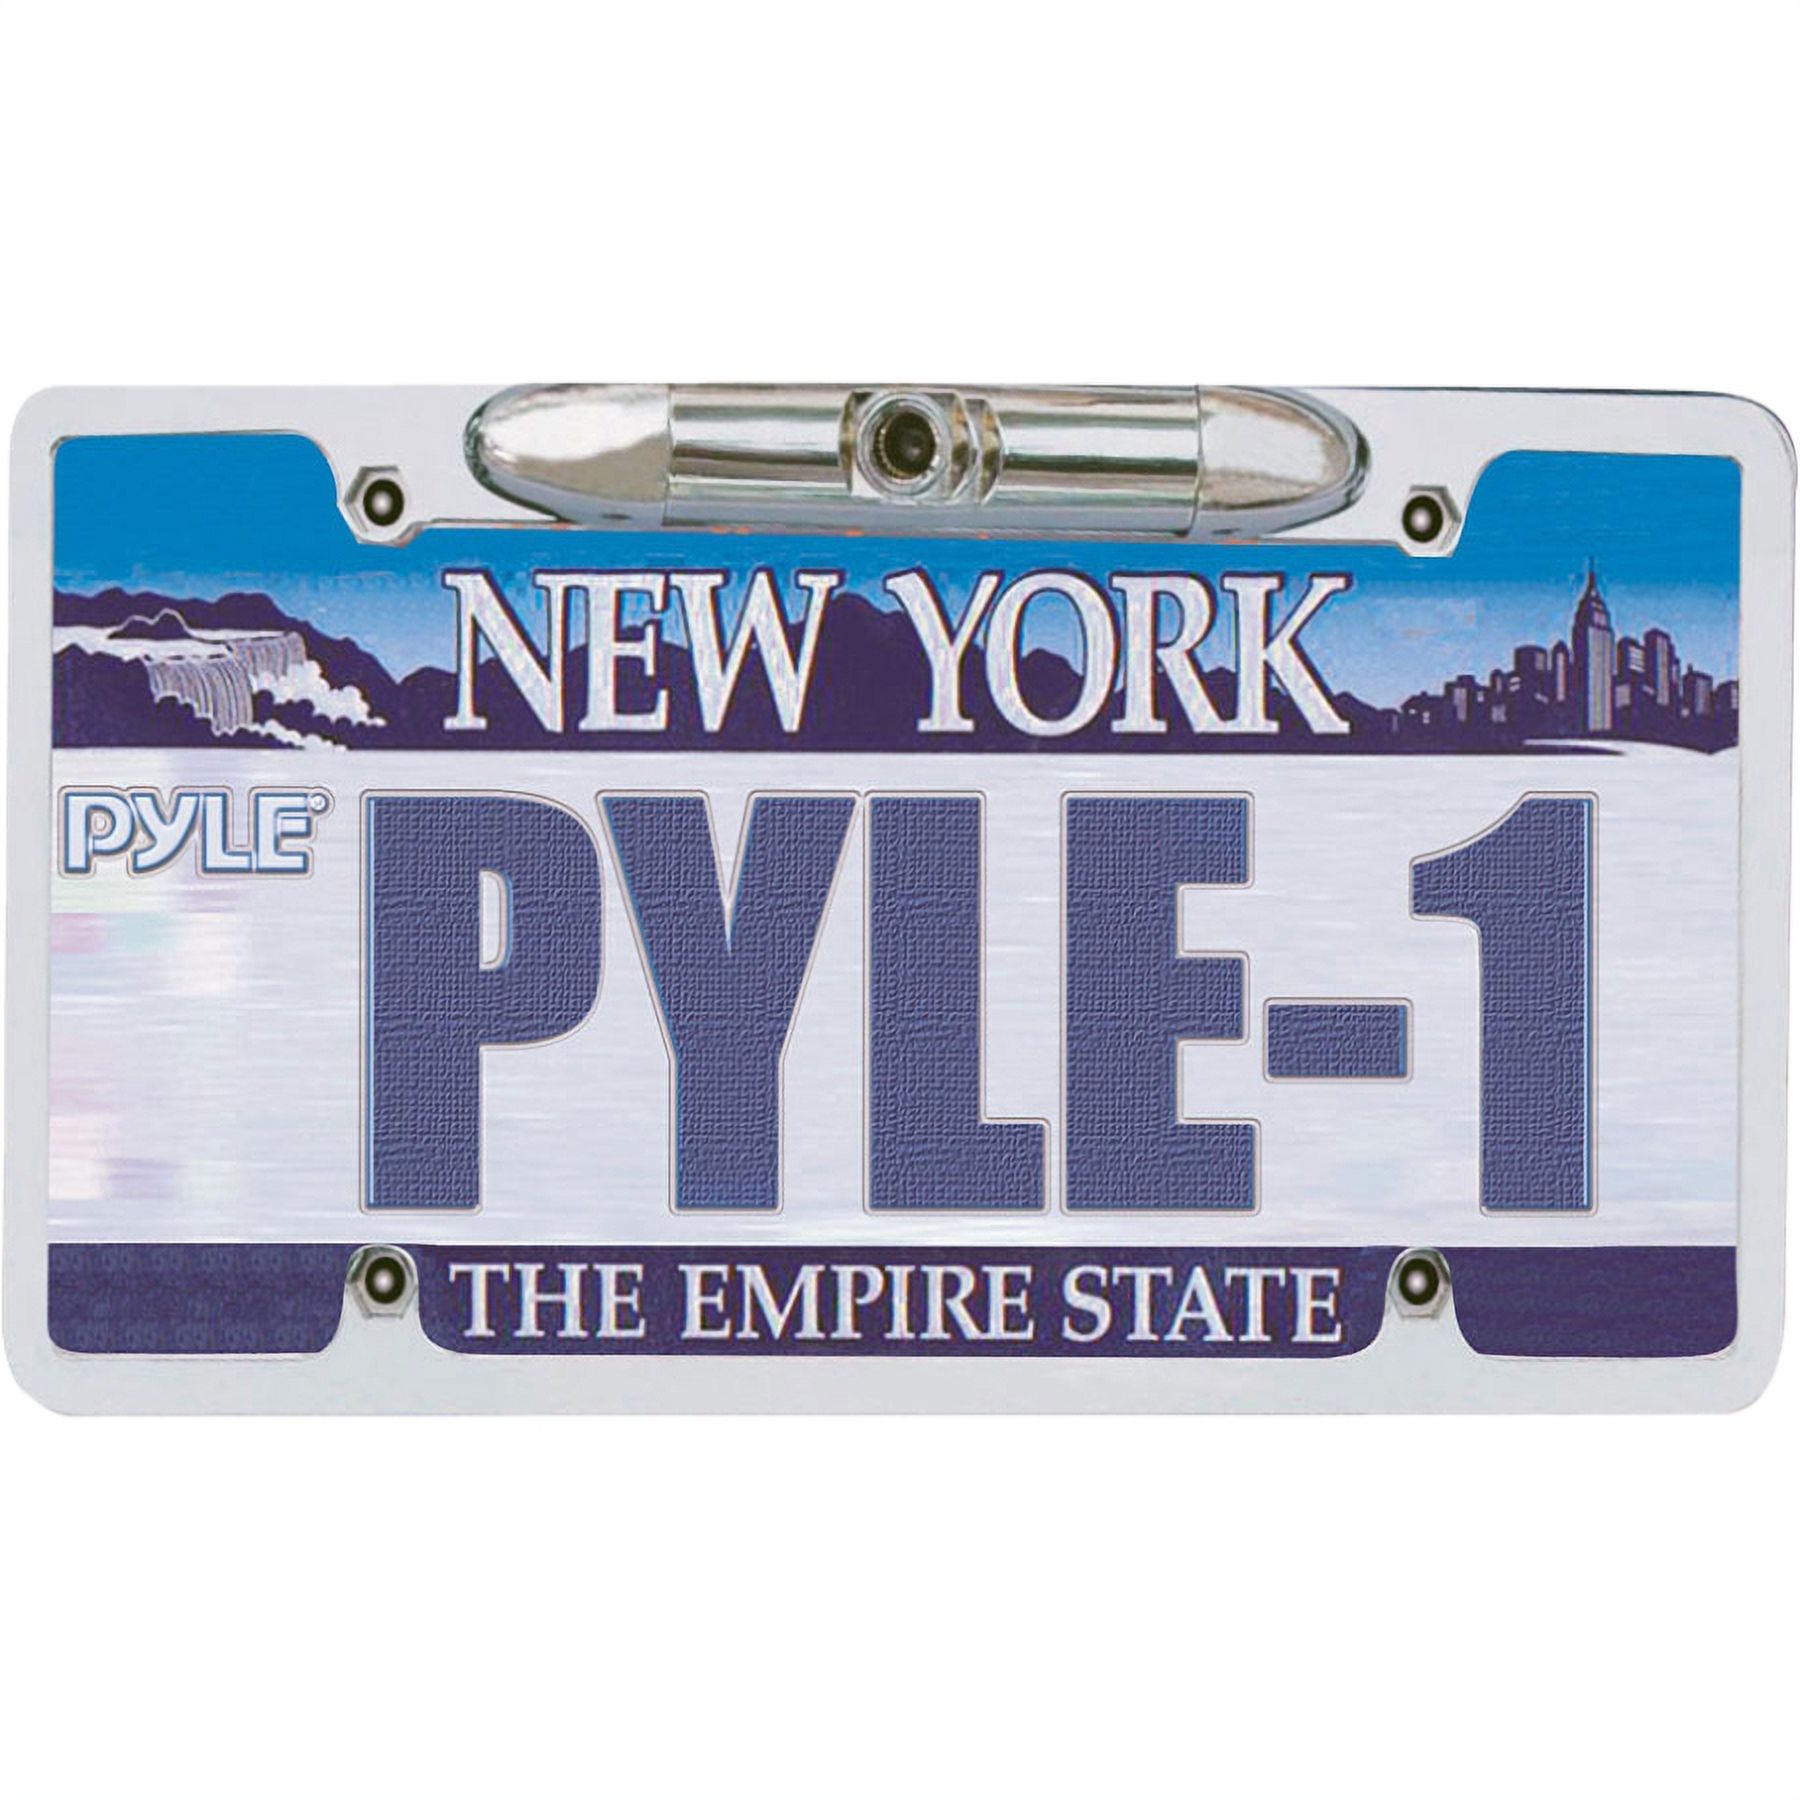 Pyle License Plate Rear View Camera - image 2 of 2